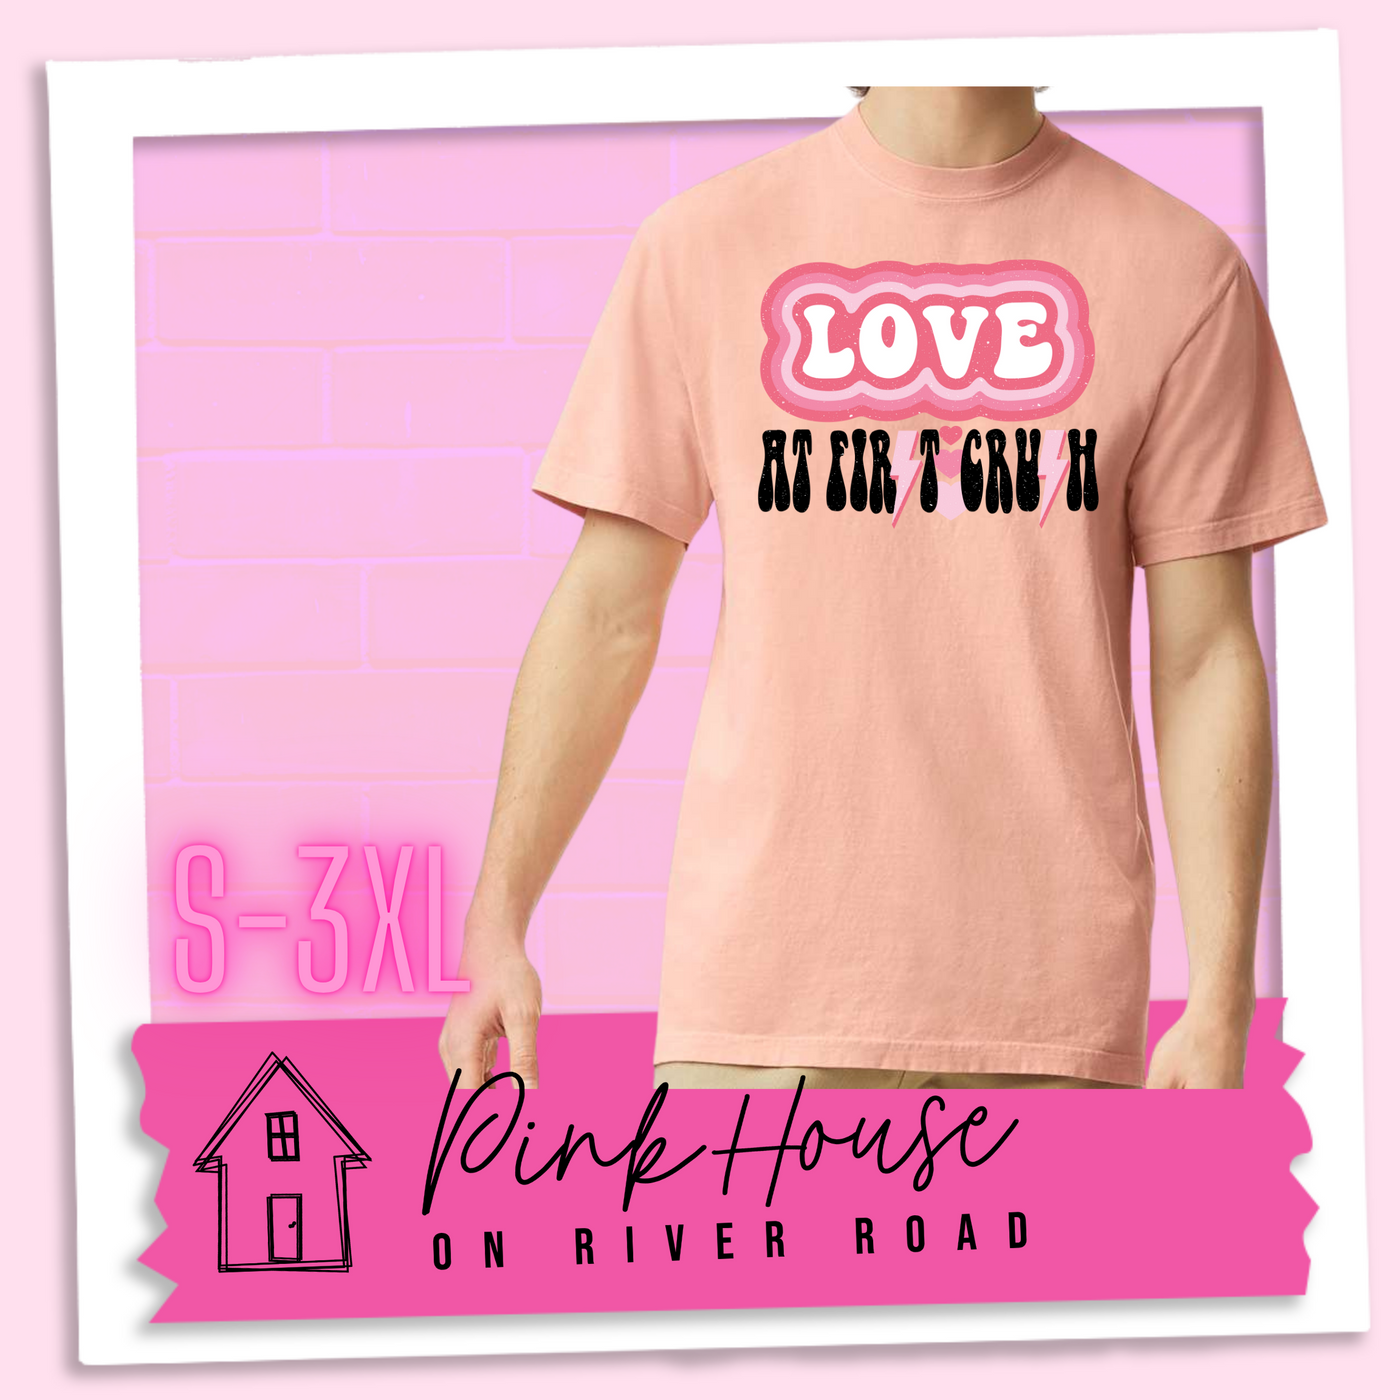 Peachy Tee. The graphic has the word Love in retro bubble letters with differetn colored pink outlines radiating from the word, underneath are the worxs at first in black with the s in first replaced with a pink lightning bolt, then there are three different colored hearts followed by the word crush in the same black font with the S replaced with the same pink lightening bolt.